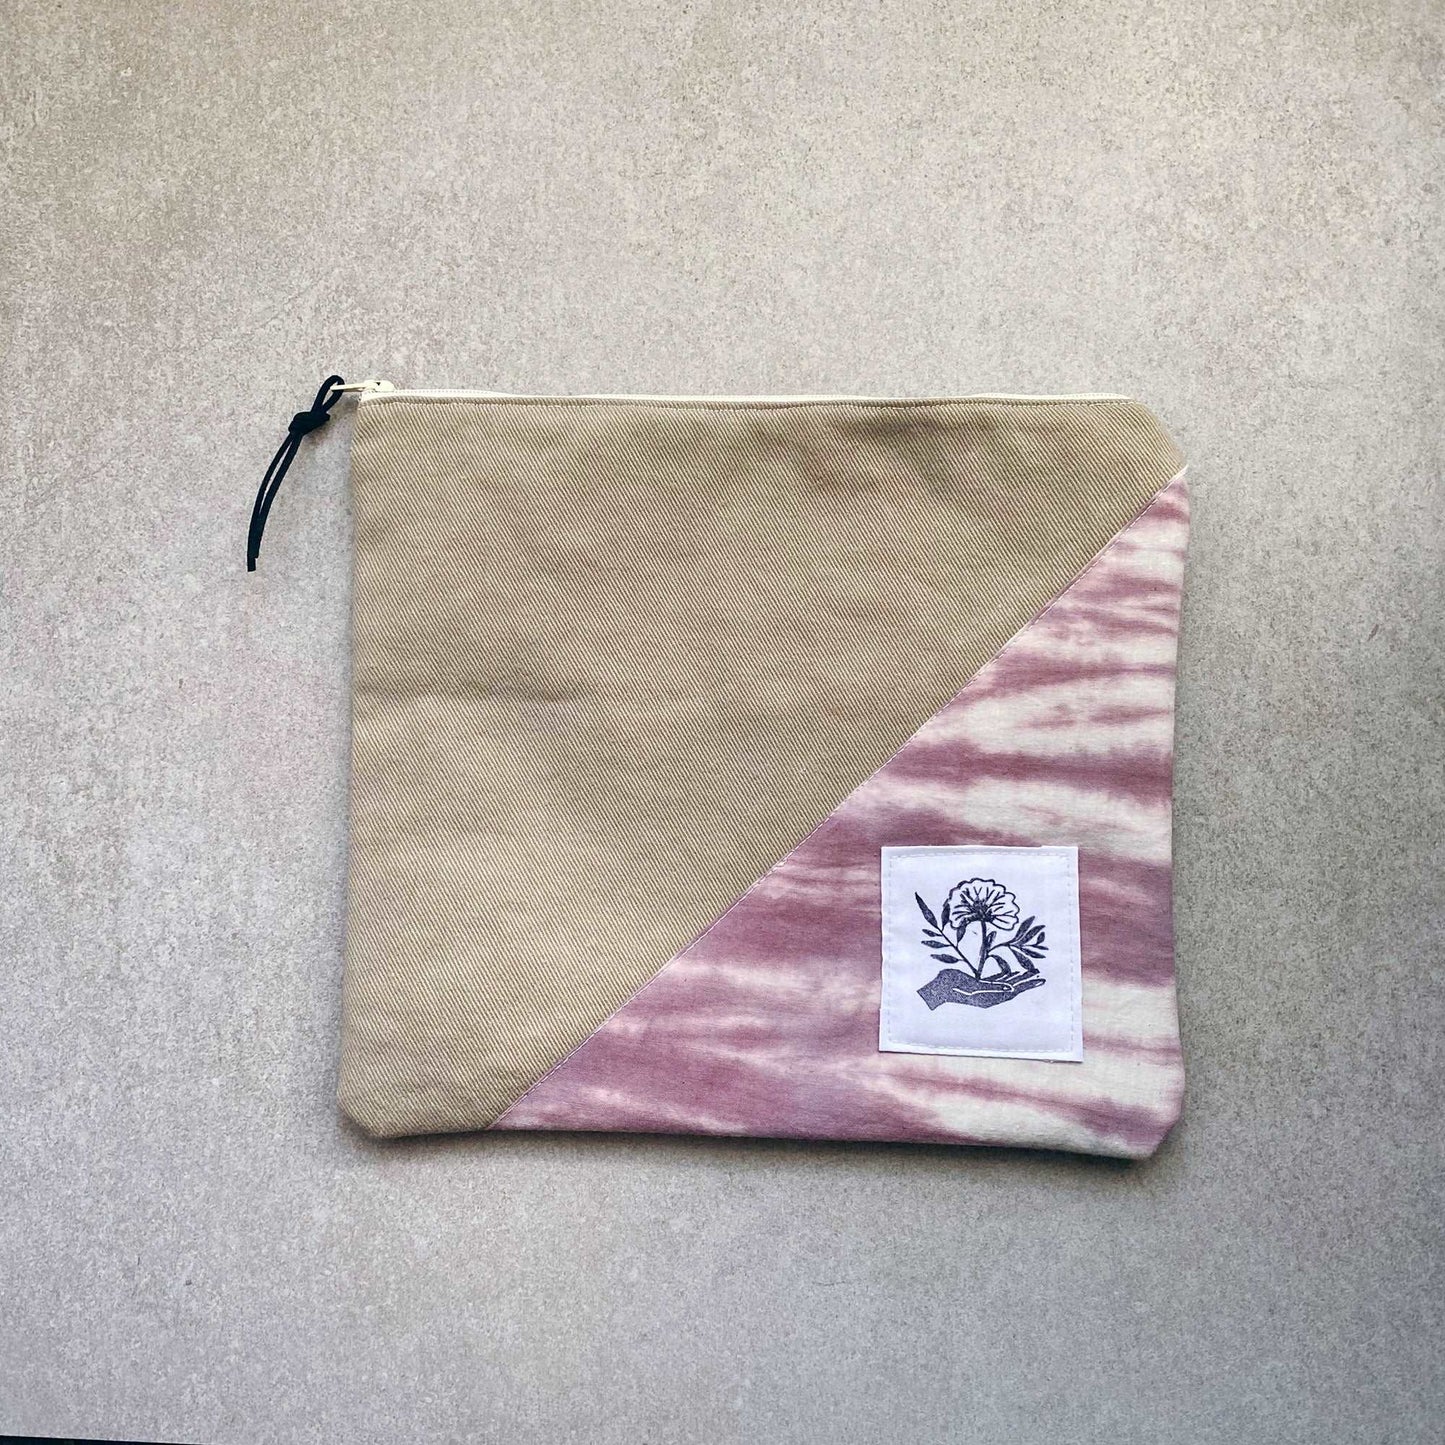 This is a photo of a large canvas zipper pouch with a clay colored tie dye fabric panel on it. It is laying on a light gray background.